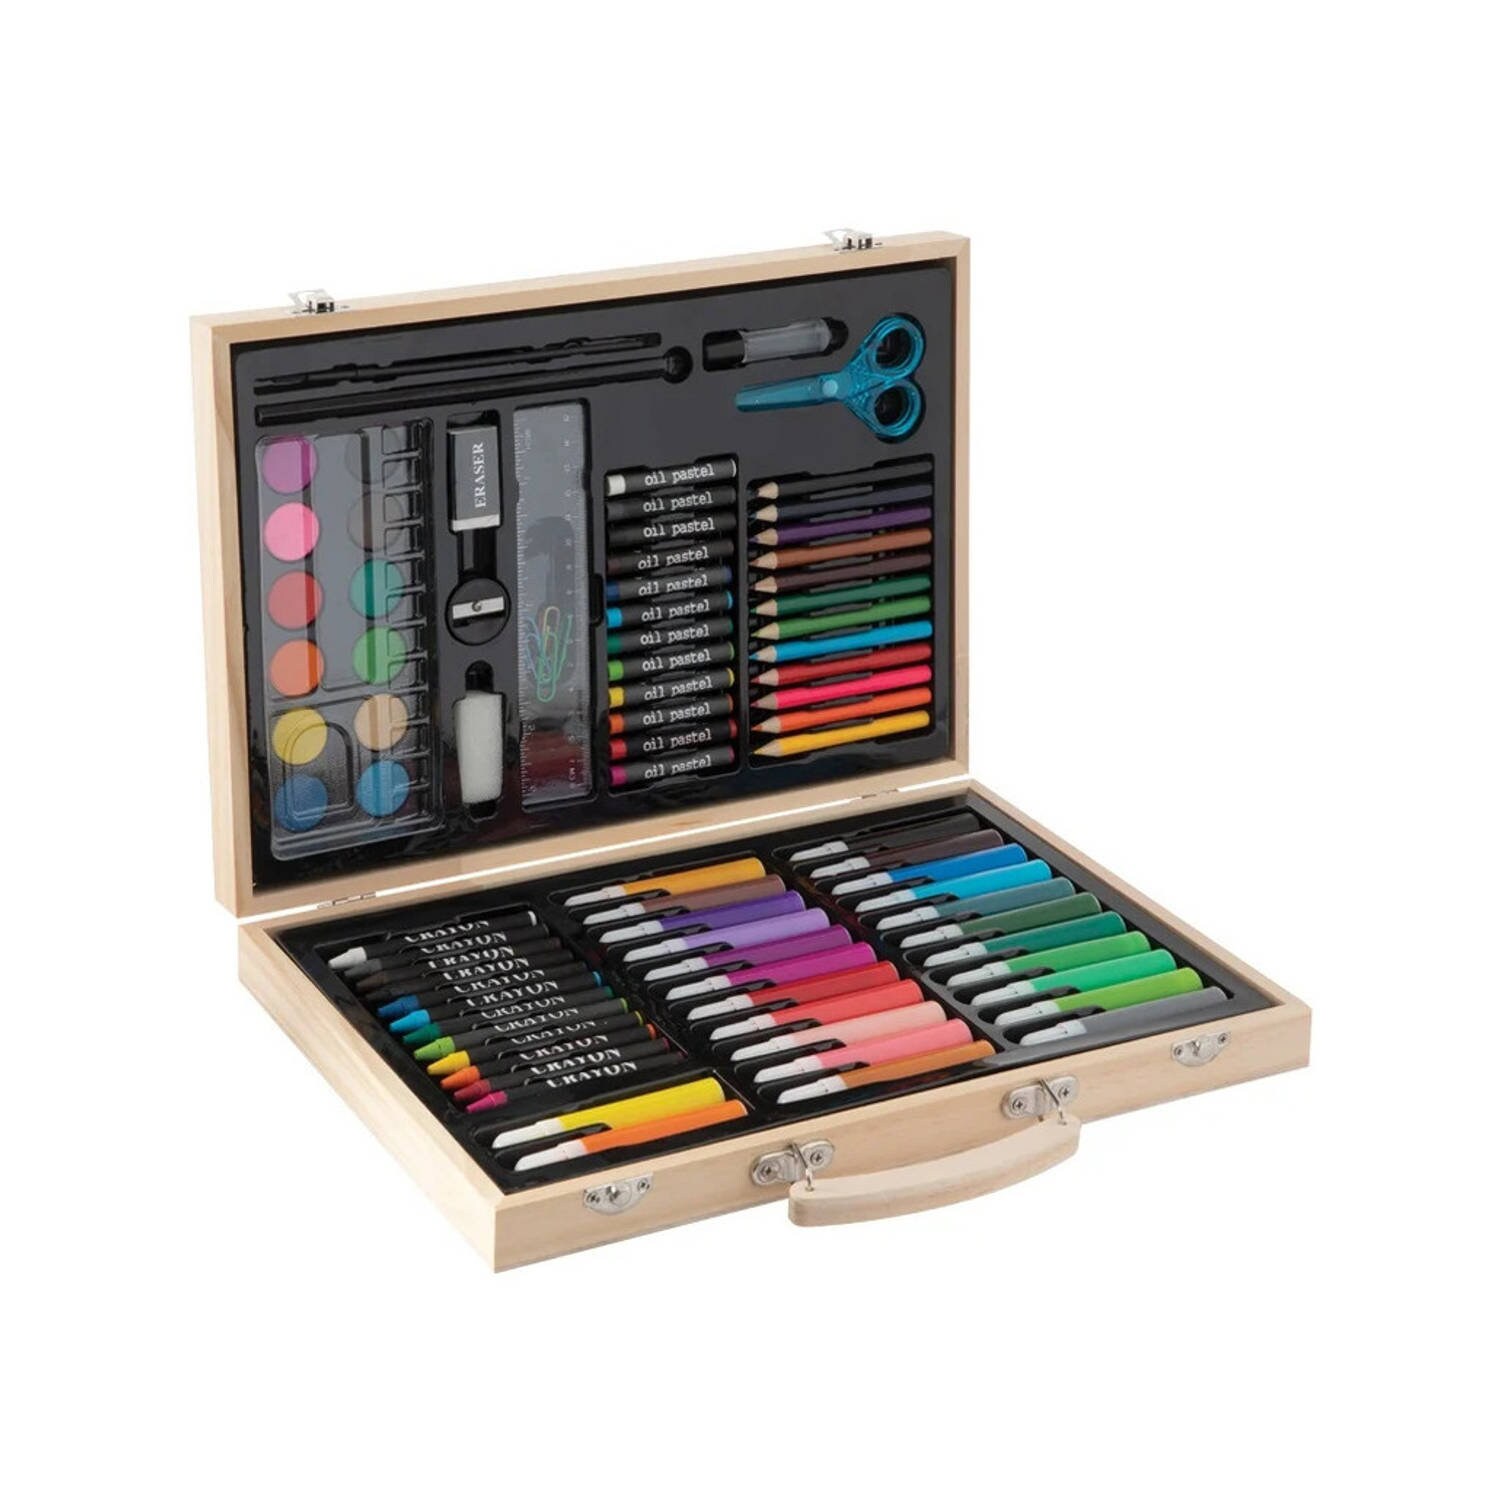 Art Supplies 153-Pack Deluxe Wooden Art Set Crafts Drawing Painting